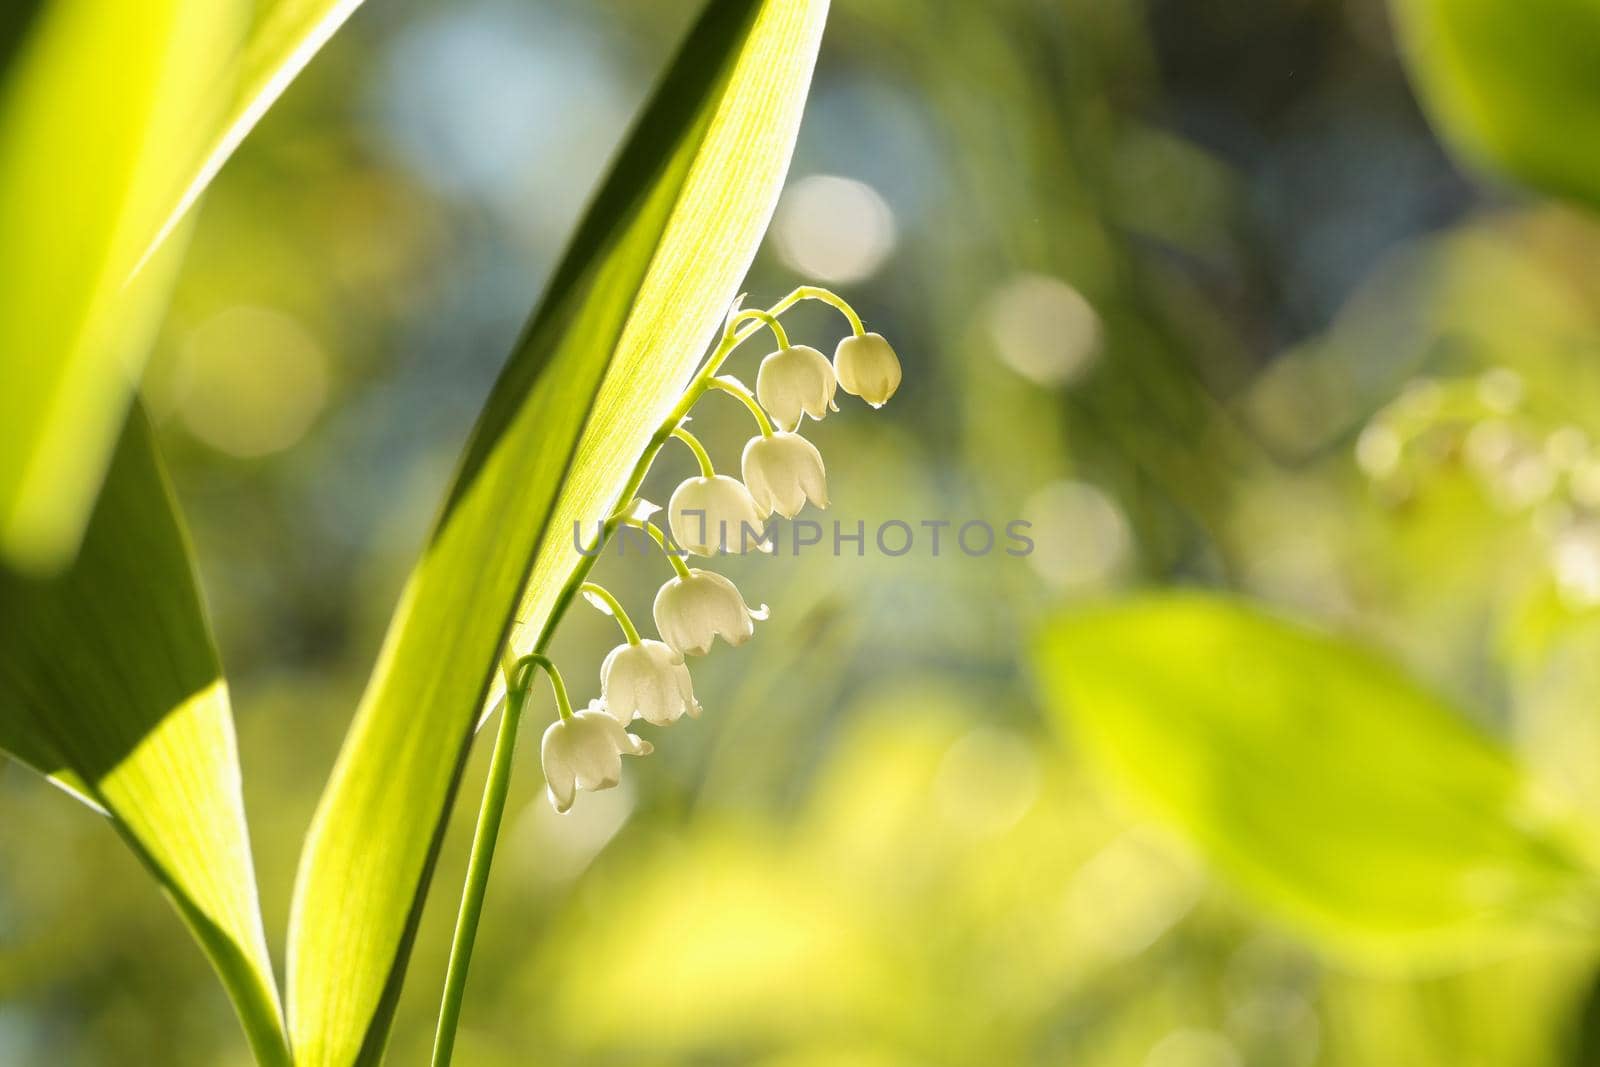 Lily of the valley in the forest.